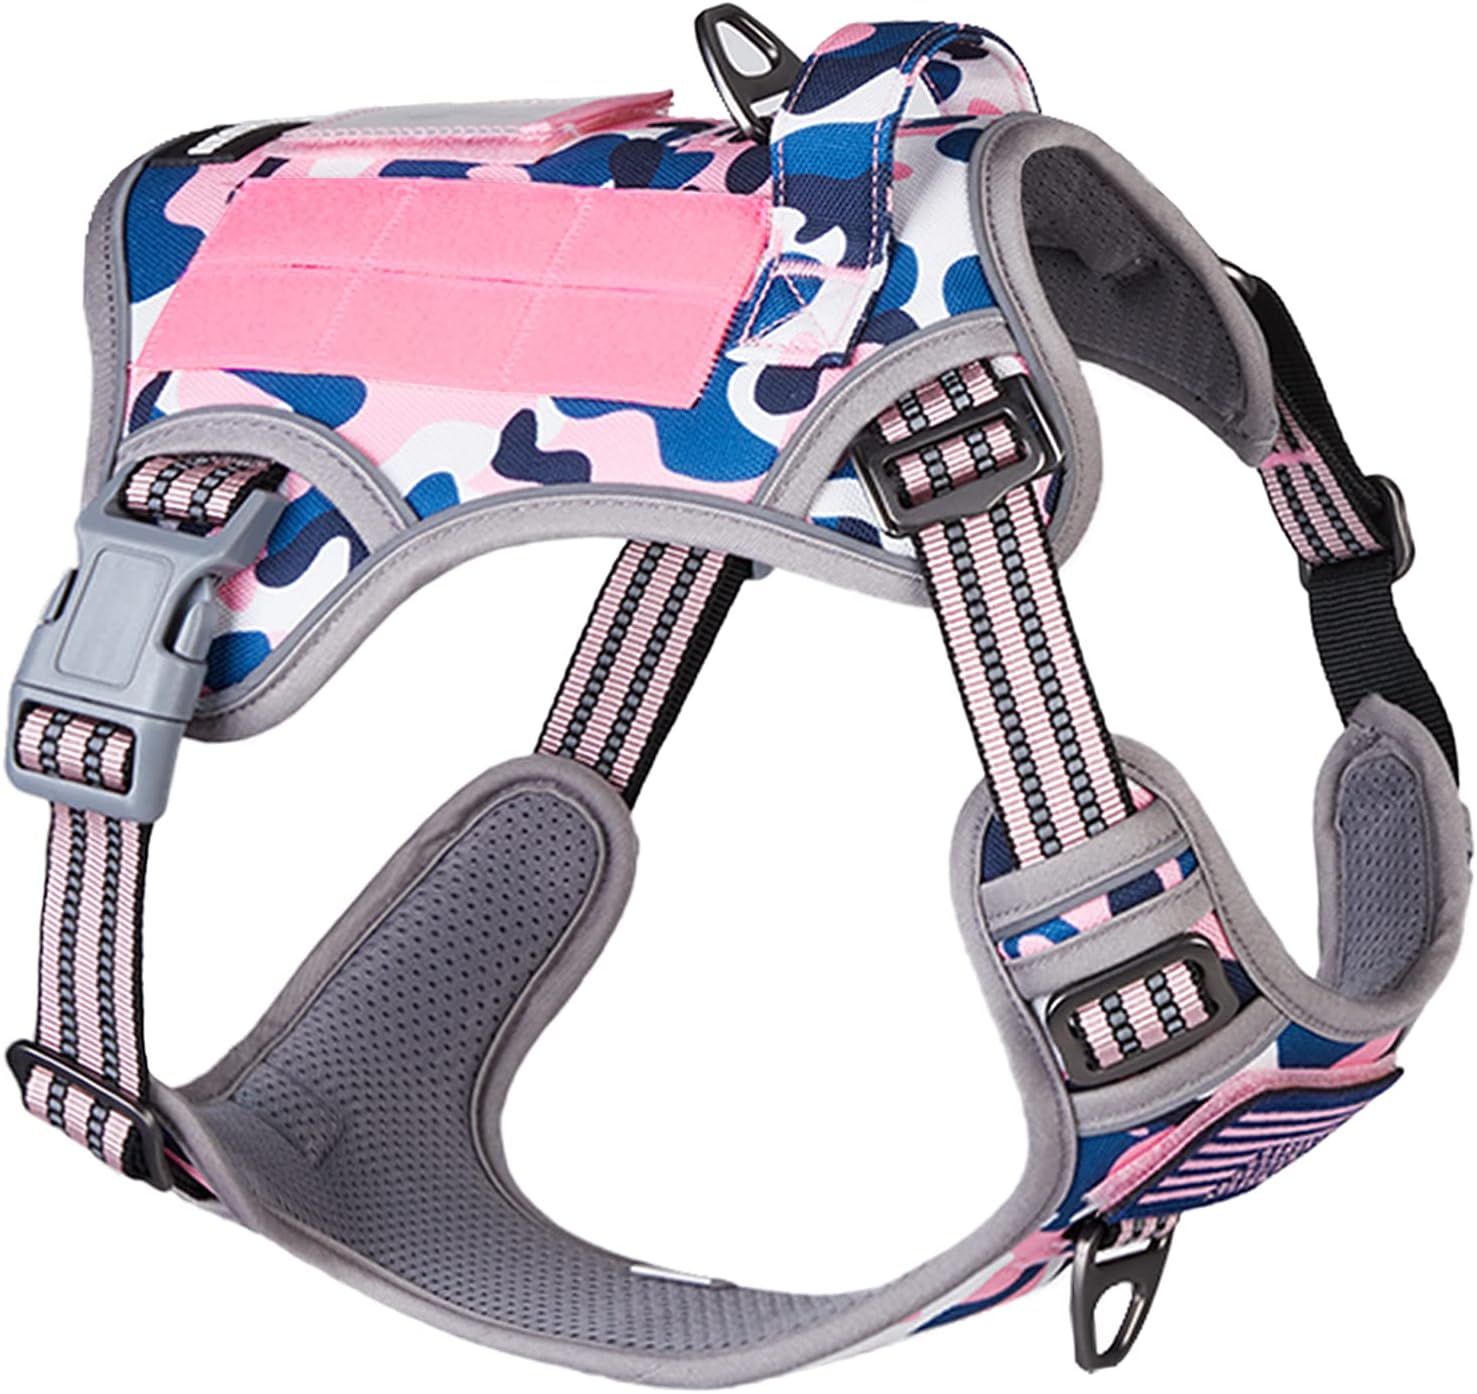 BUMBIN Tactical Dog Harness for Small Dogs No Pull, Famous TIK Tok No Pull Puppy Harness, Fit Smart Reflective Pet Walking Harness for Training, Adjustable Dog Vest Harness with Handle Forest Camo S